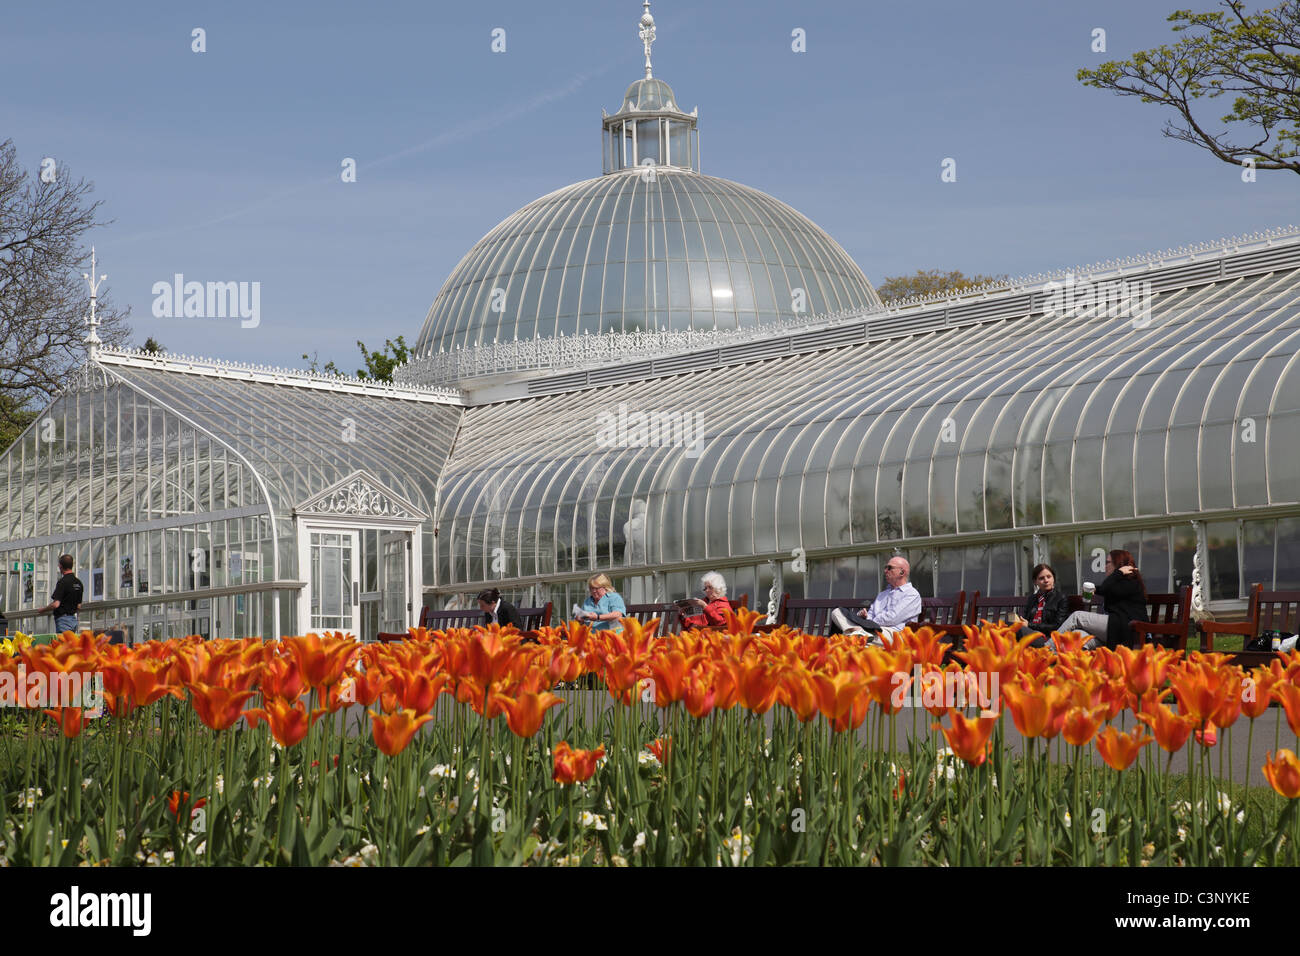 Kibble Palace Victorian glasshouse in the Botanic Gardens in the West End of Glasgow, Scotland, UK Stock Photo